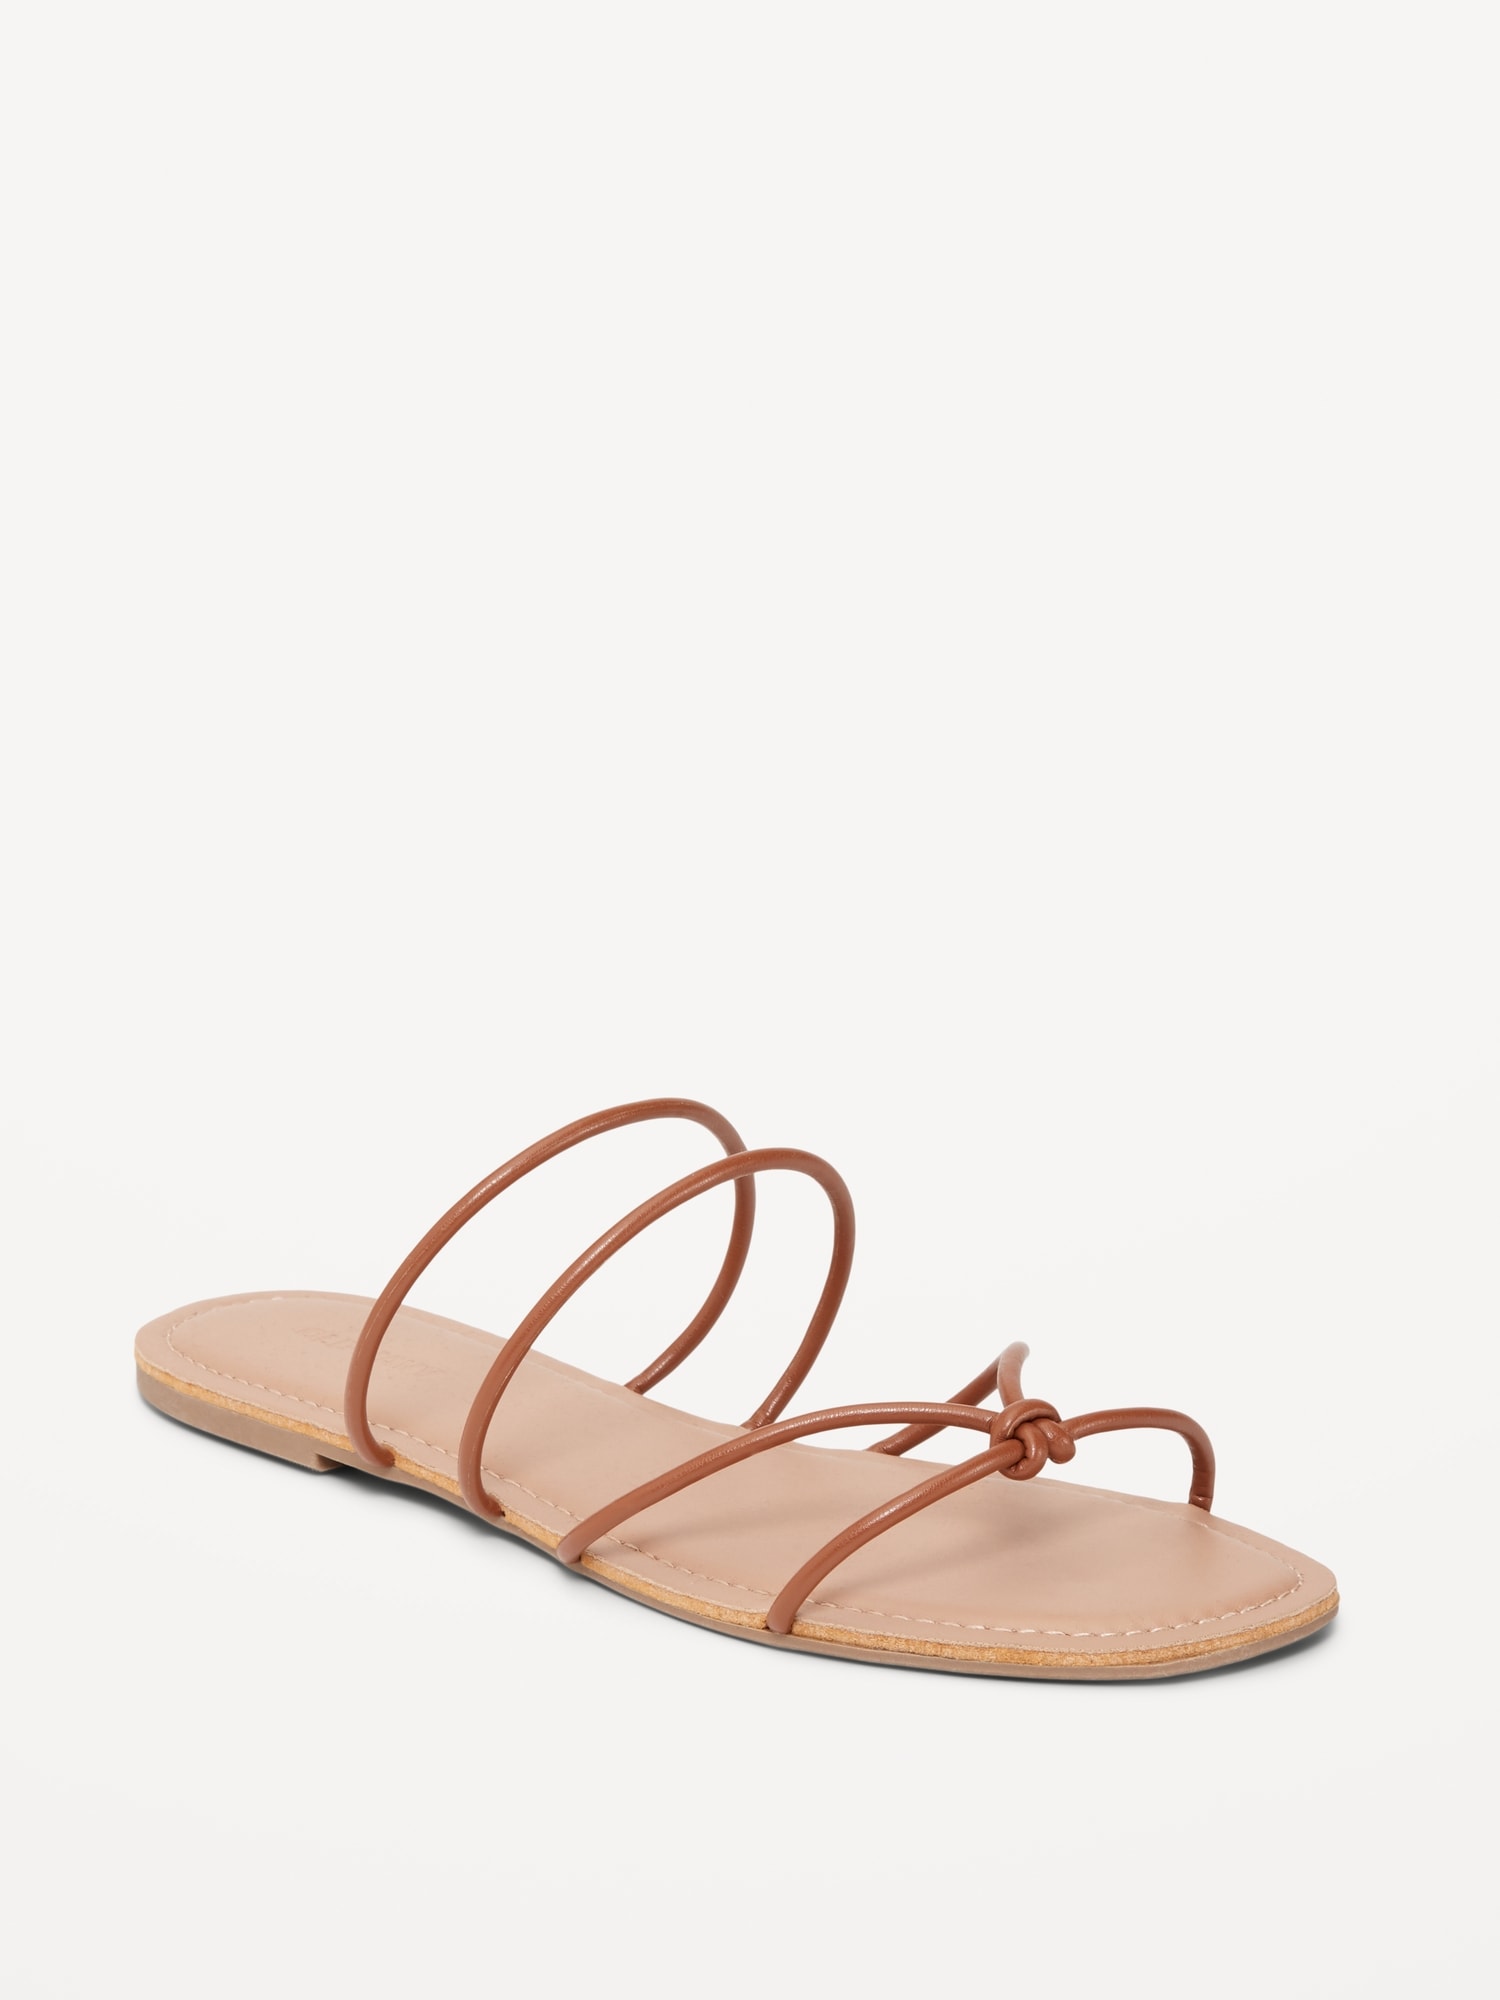 Ladies Strappy Sandals | Strappy Leather & Nubuck Sandals | Moshulu